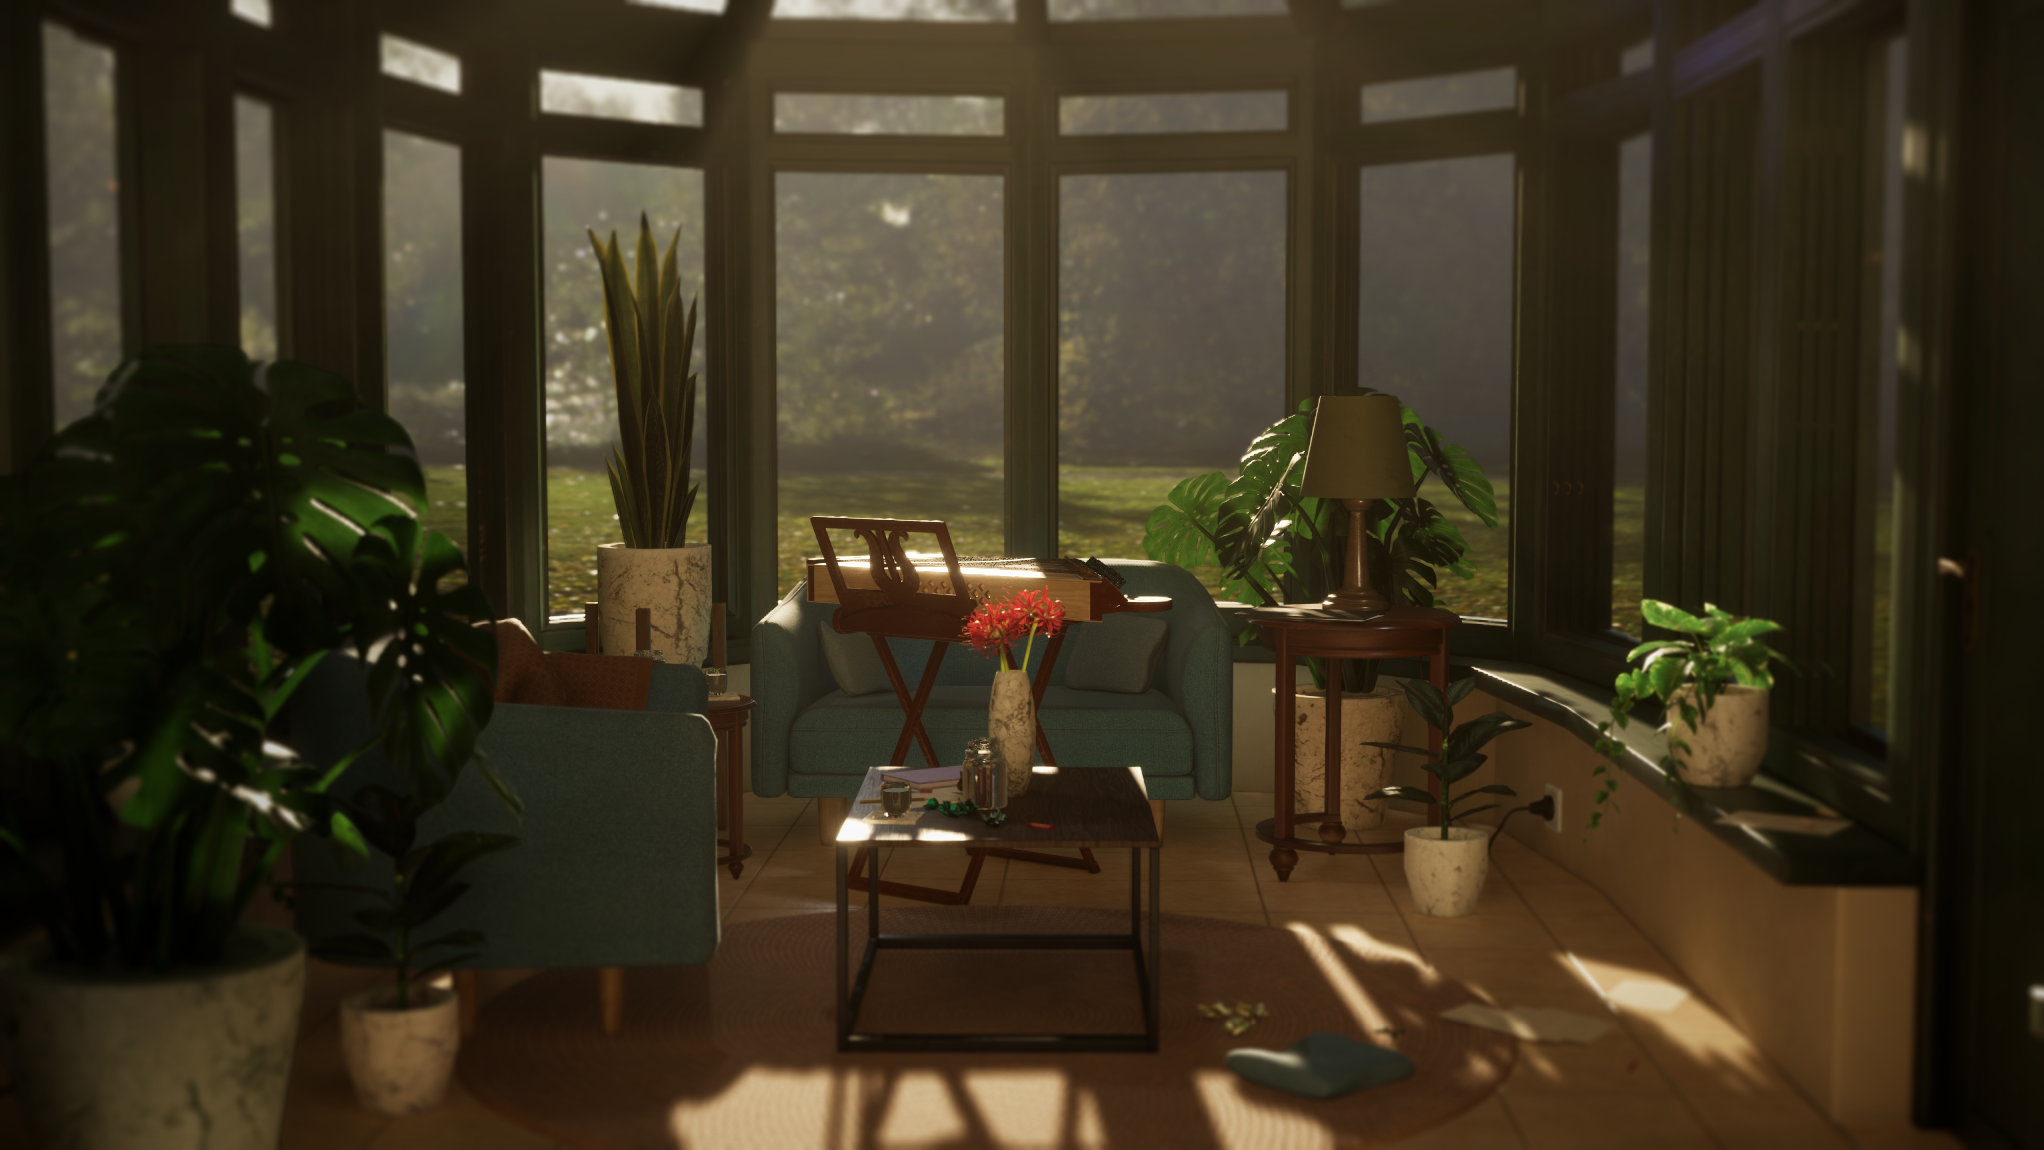 A 3D environment, which depicts a conservatory, which a family uses for relaxation.